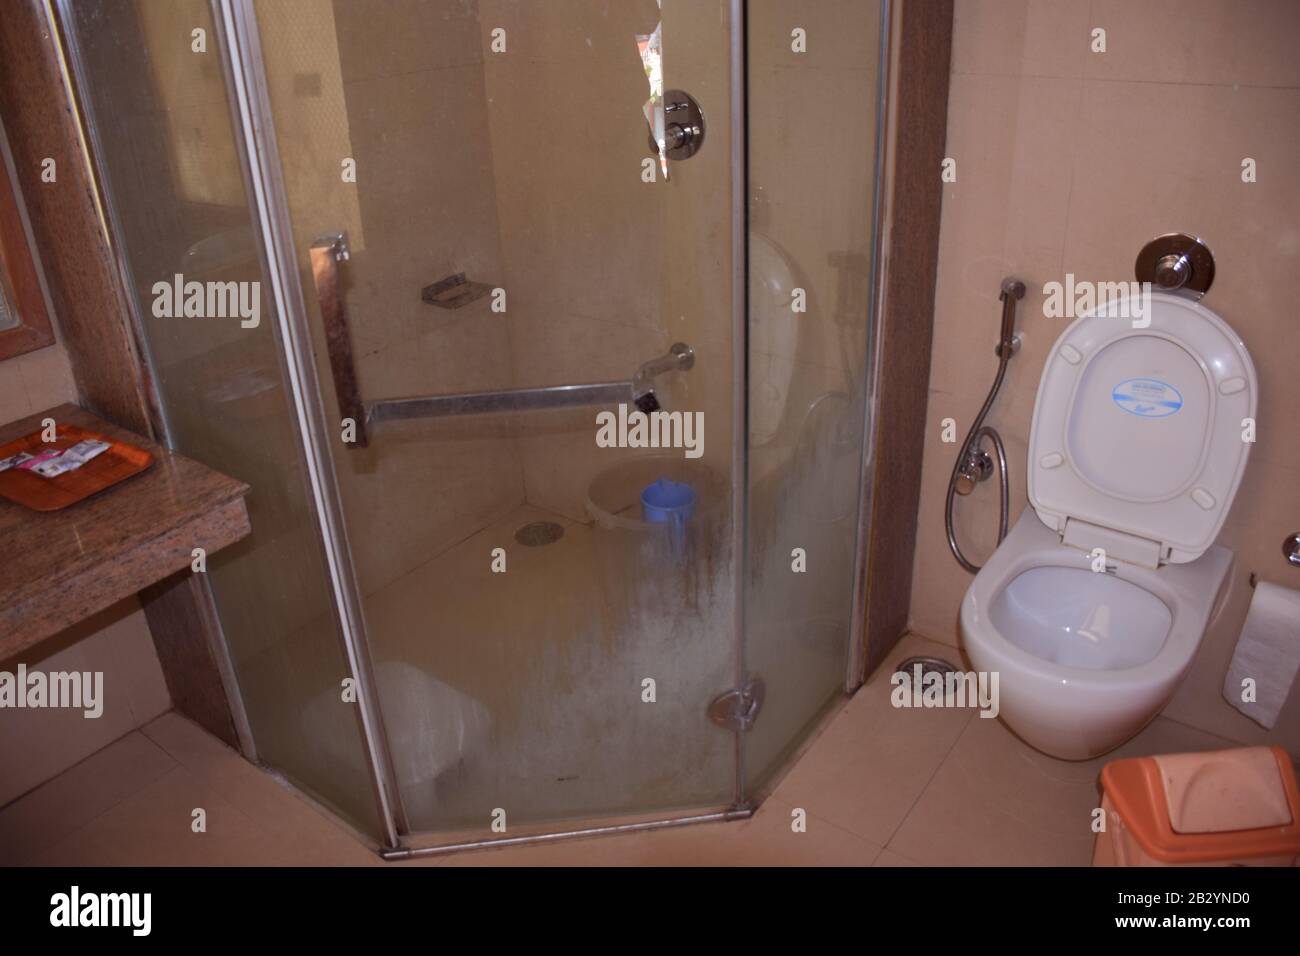 A toilet Commode with glass bathing room in a hotel Stock Photo